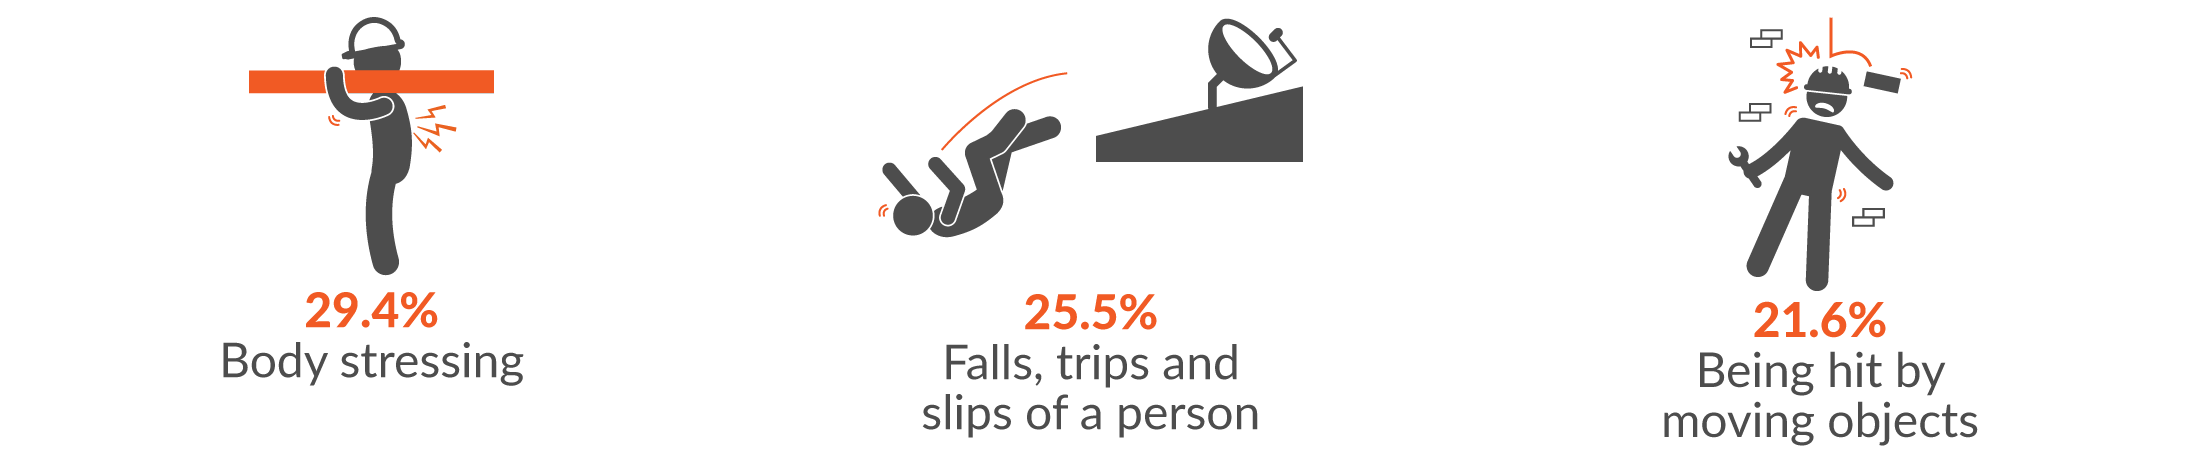 This infographic shows the main three mechanisms of serious injury for construction claims were 29.4% body stressing; 25.5% falls, trips and slips of a person; and 21.6% being hit by moving objects.